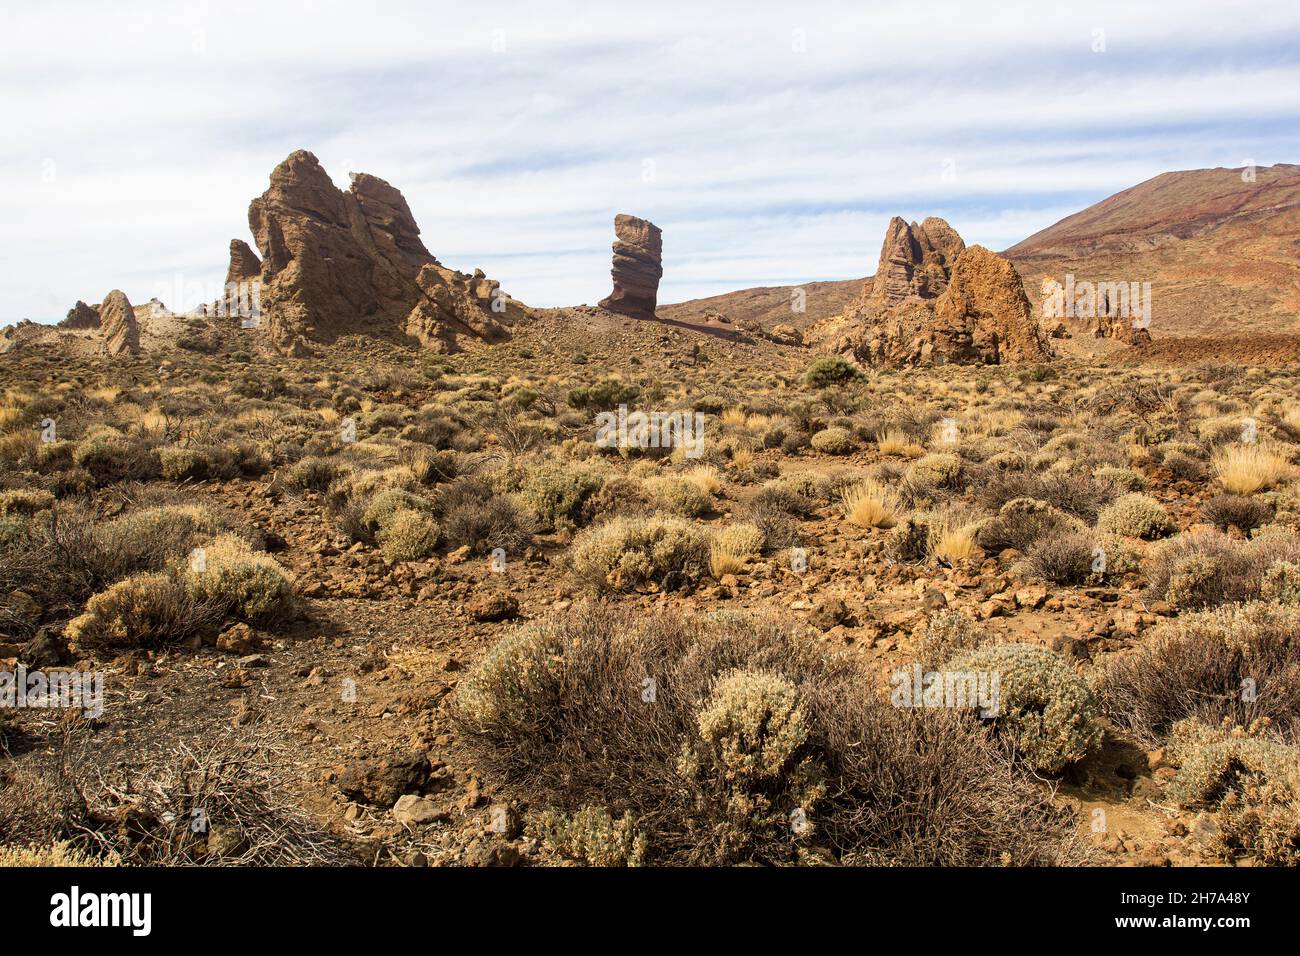 Los Roques de Garcia. Famous rock formations in Teide National Park, Tenerife, Canary Islands, Spain. Stock Photo